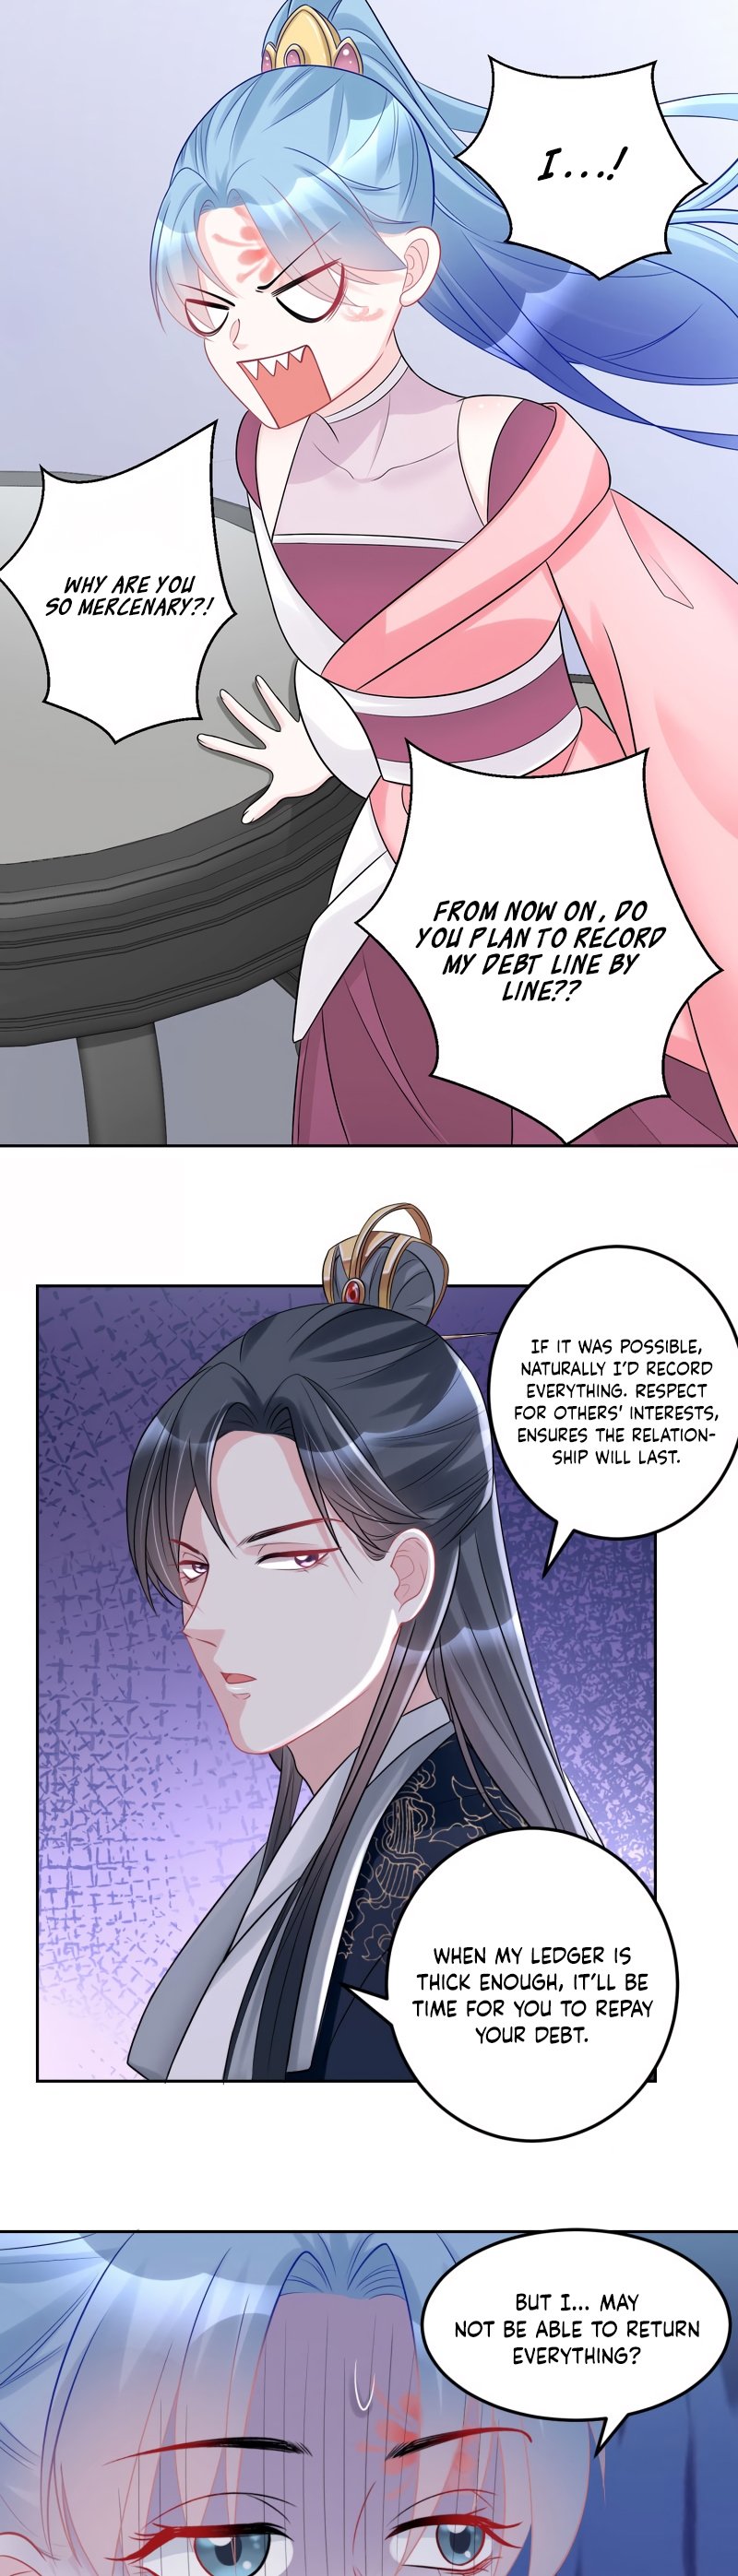 Poisonous Doctor: First Wife’s Daughter chapter 76 page 7